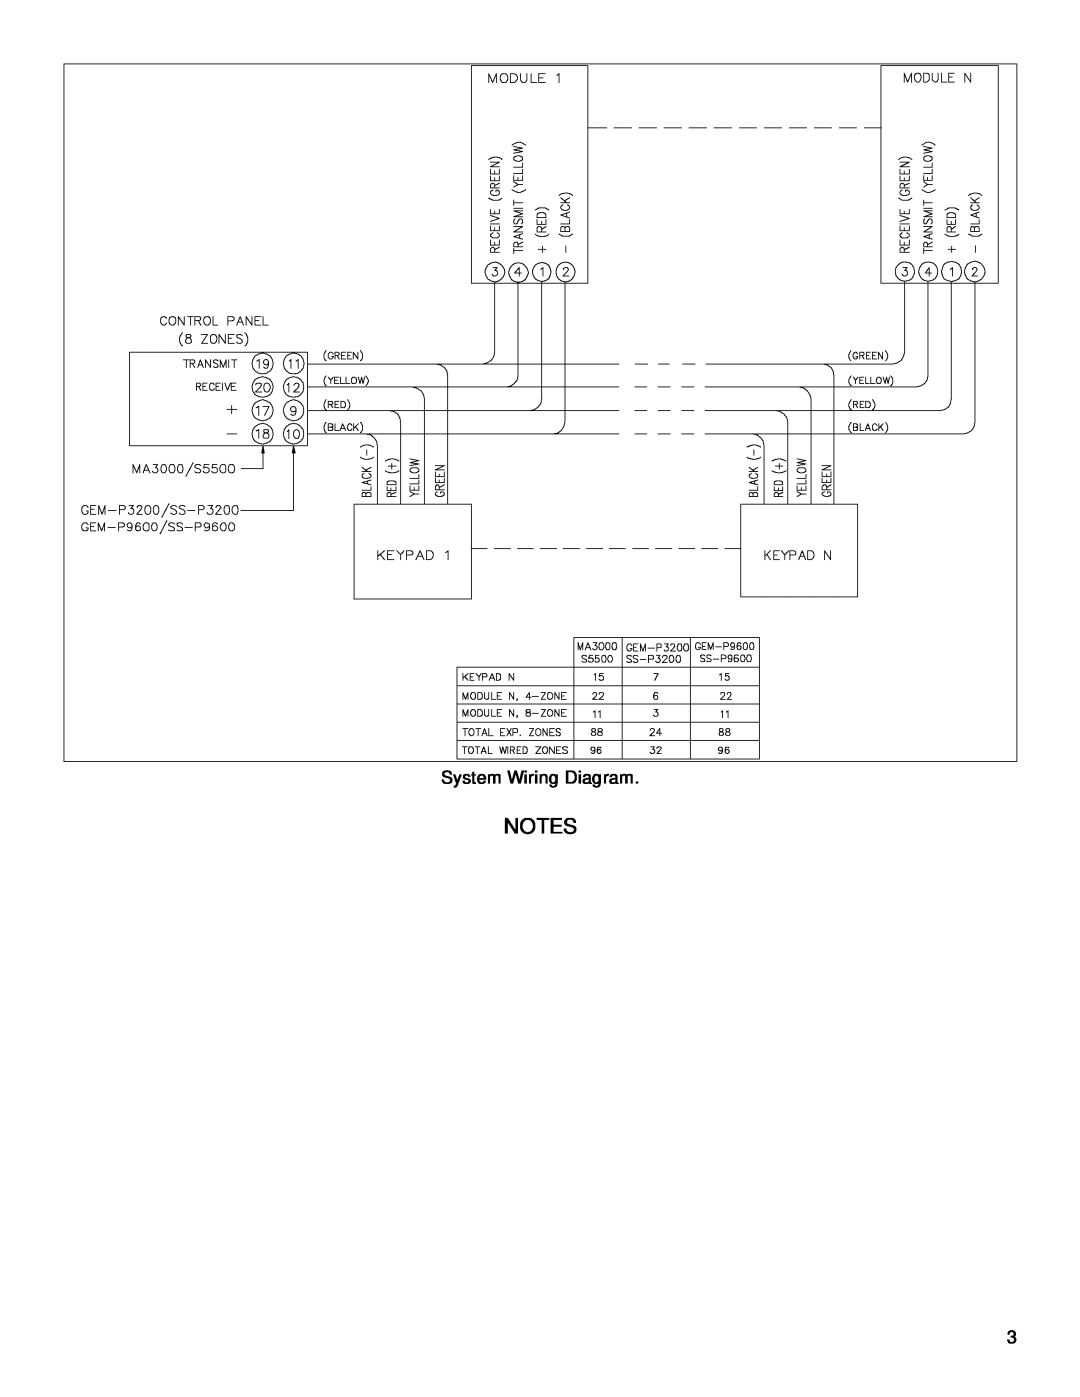 Napco Security Technologies GEM-Series, Signature 5500, MA3000, SS-P Series installation instructions System Wiring Diagram 